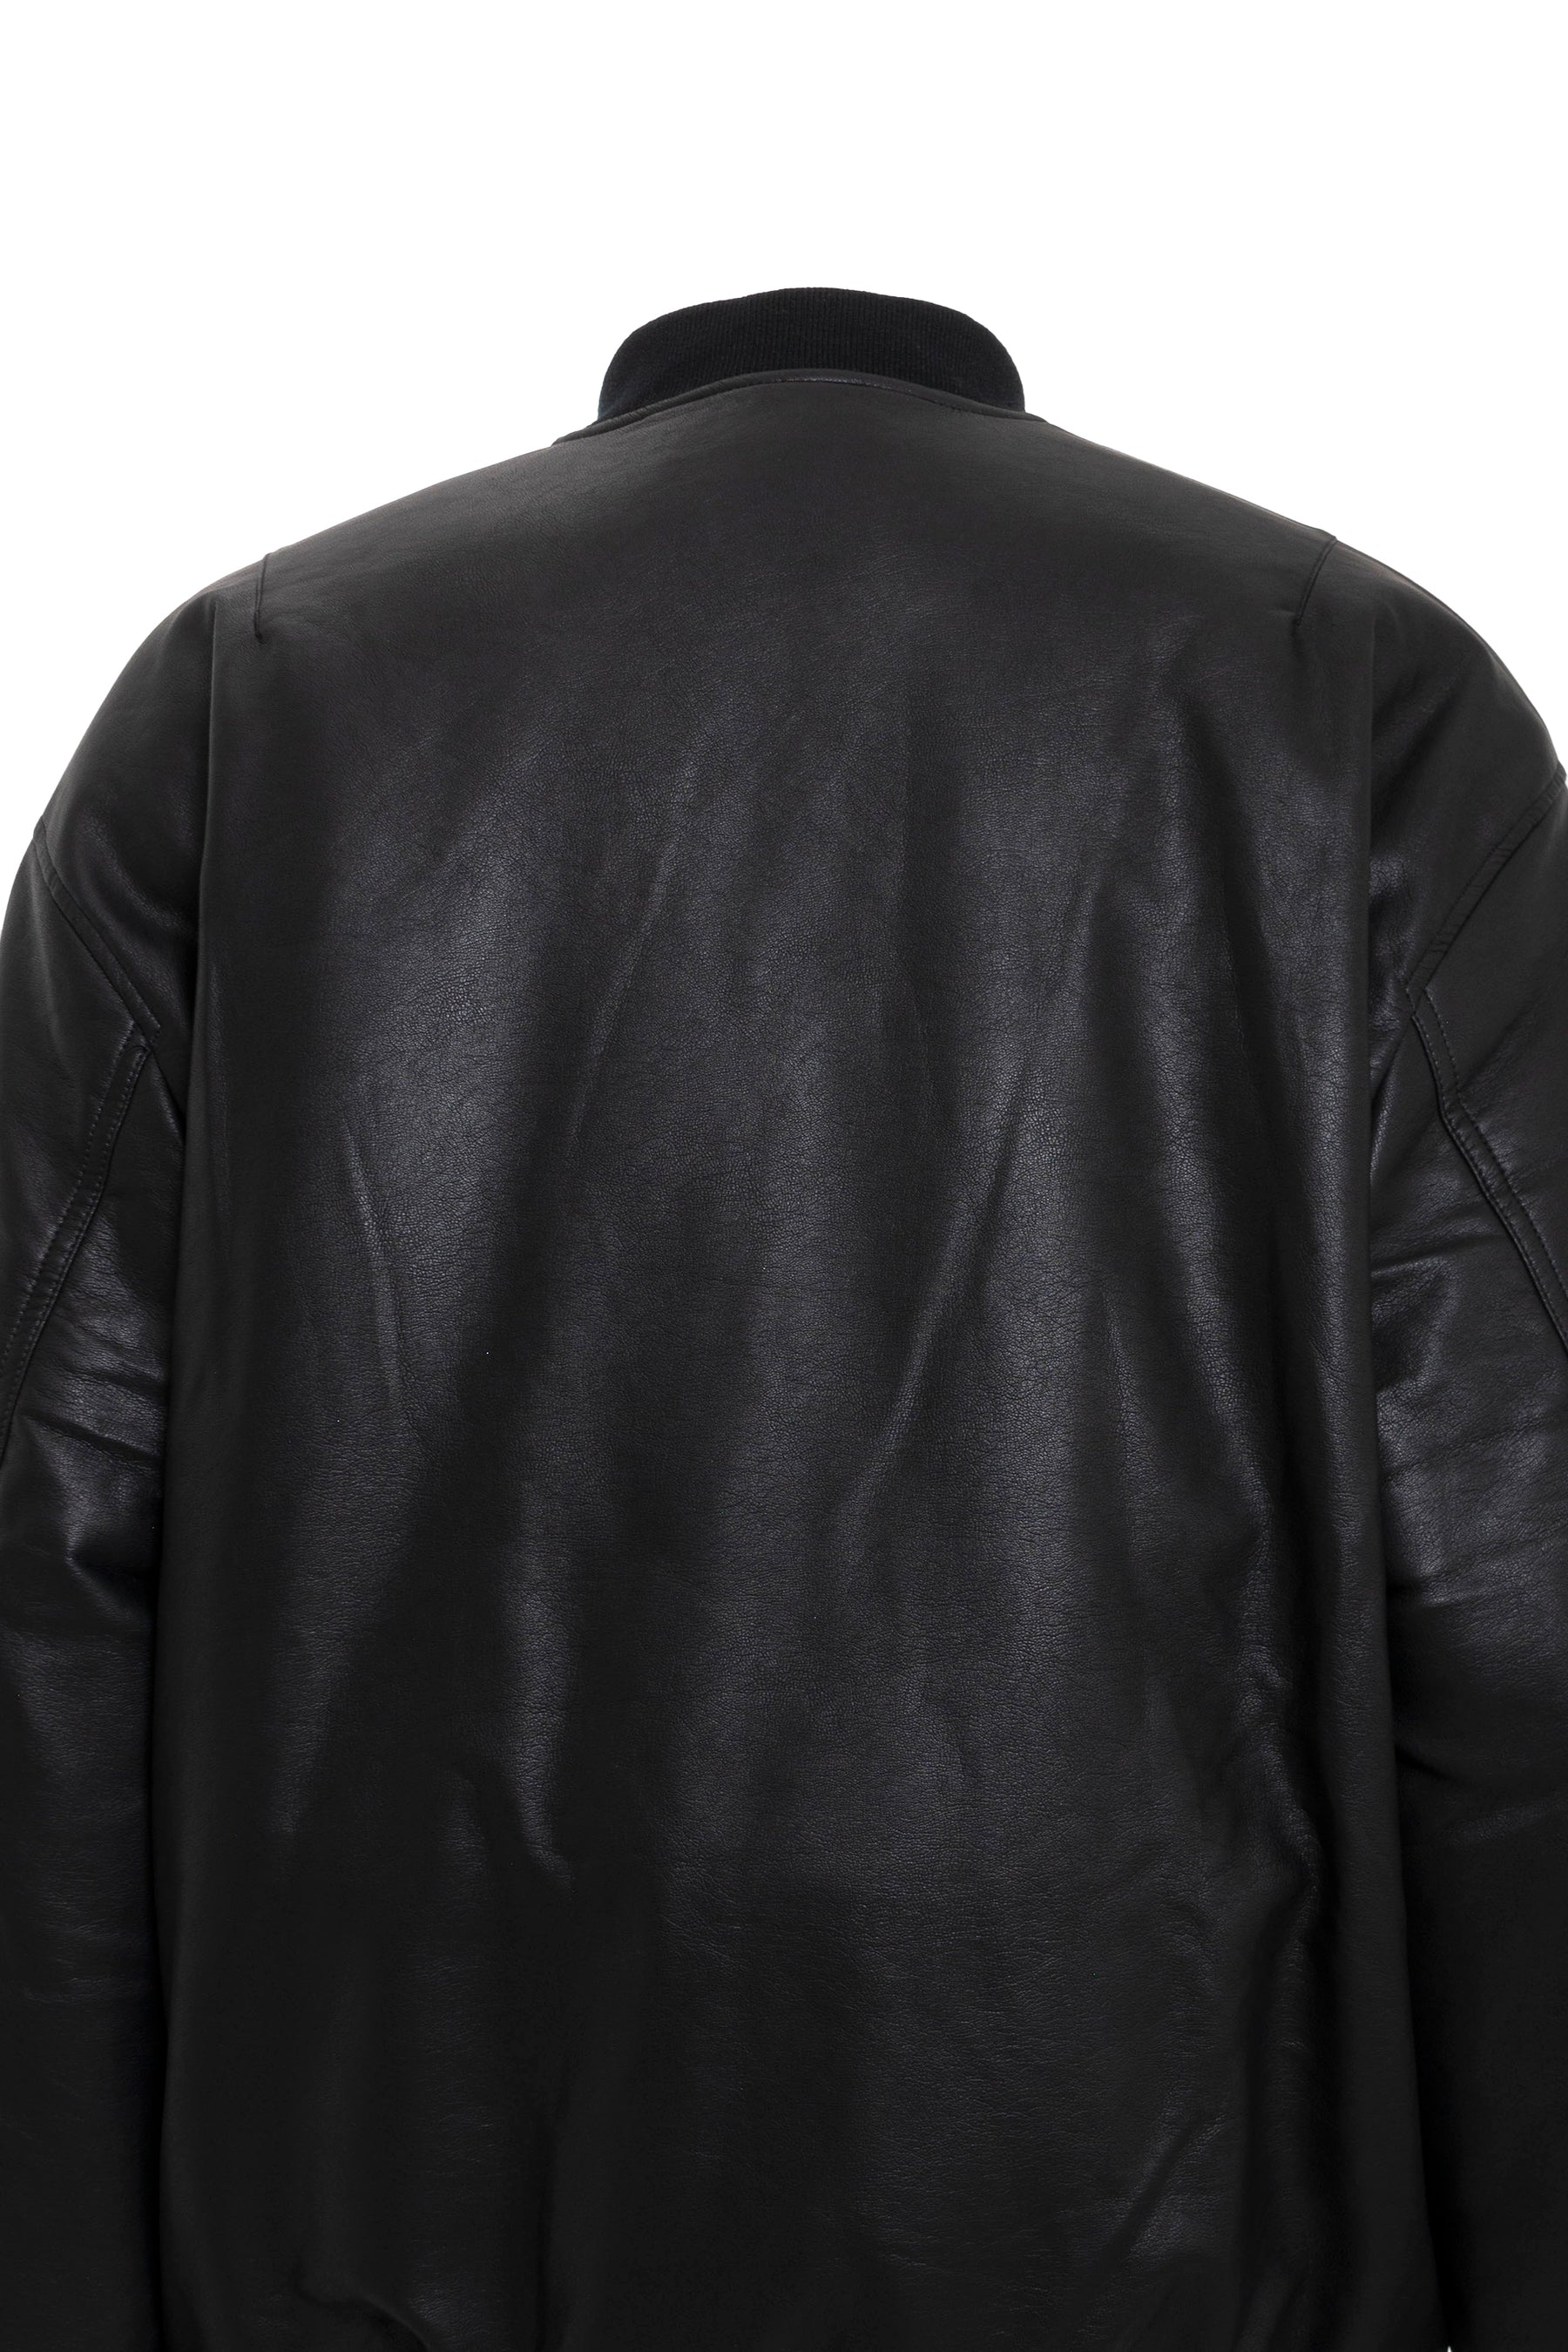 BREATH ブレス FW23 × F.M.C.D SYNTHETIC LEATHER BOMBER JACKET / BLK ...